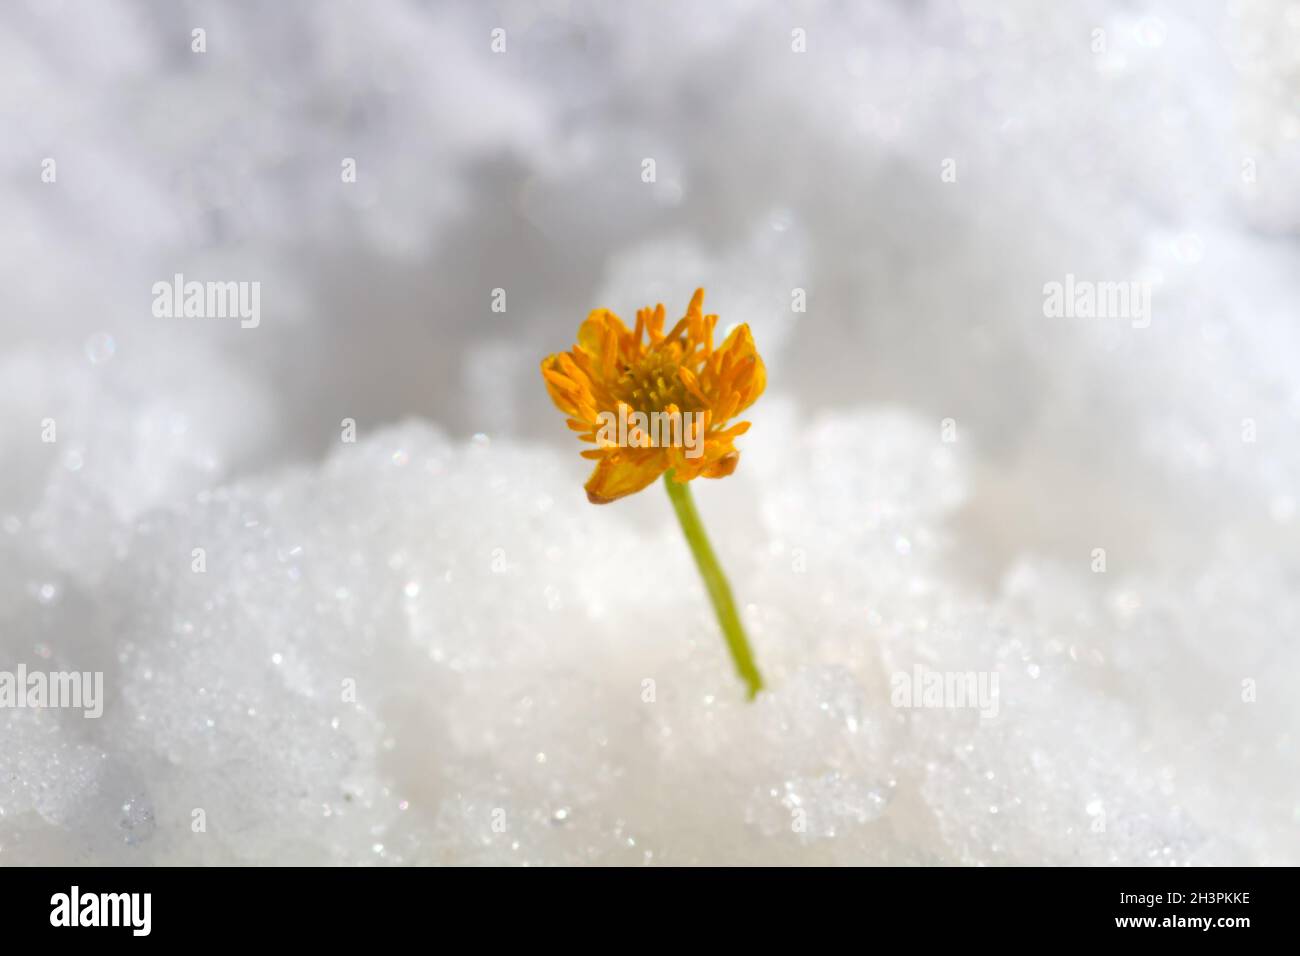 Flower or leaf in the snow Stock Photo